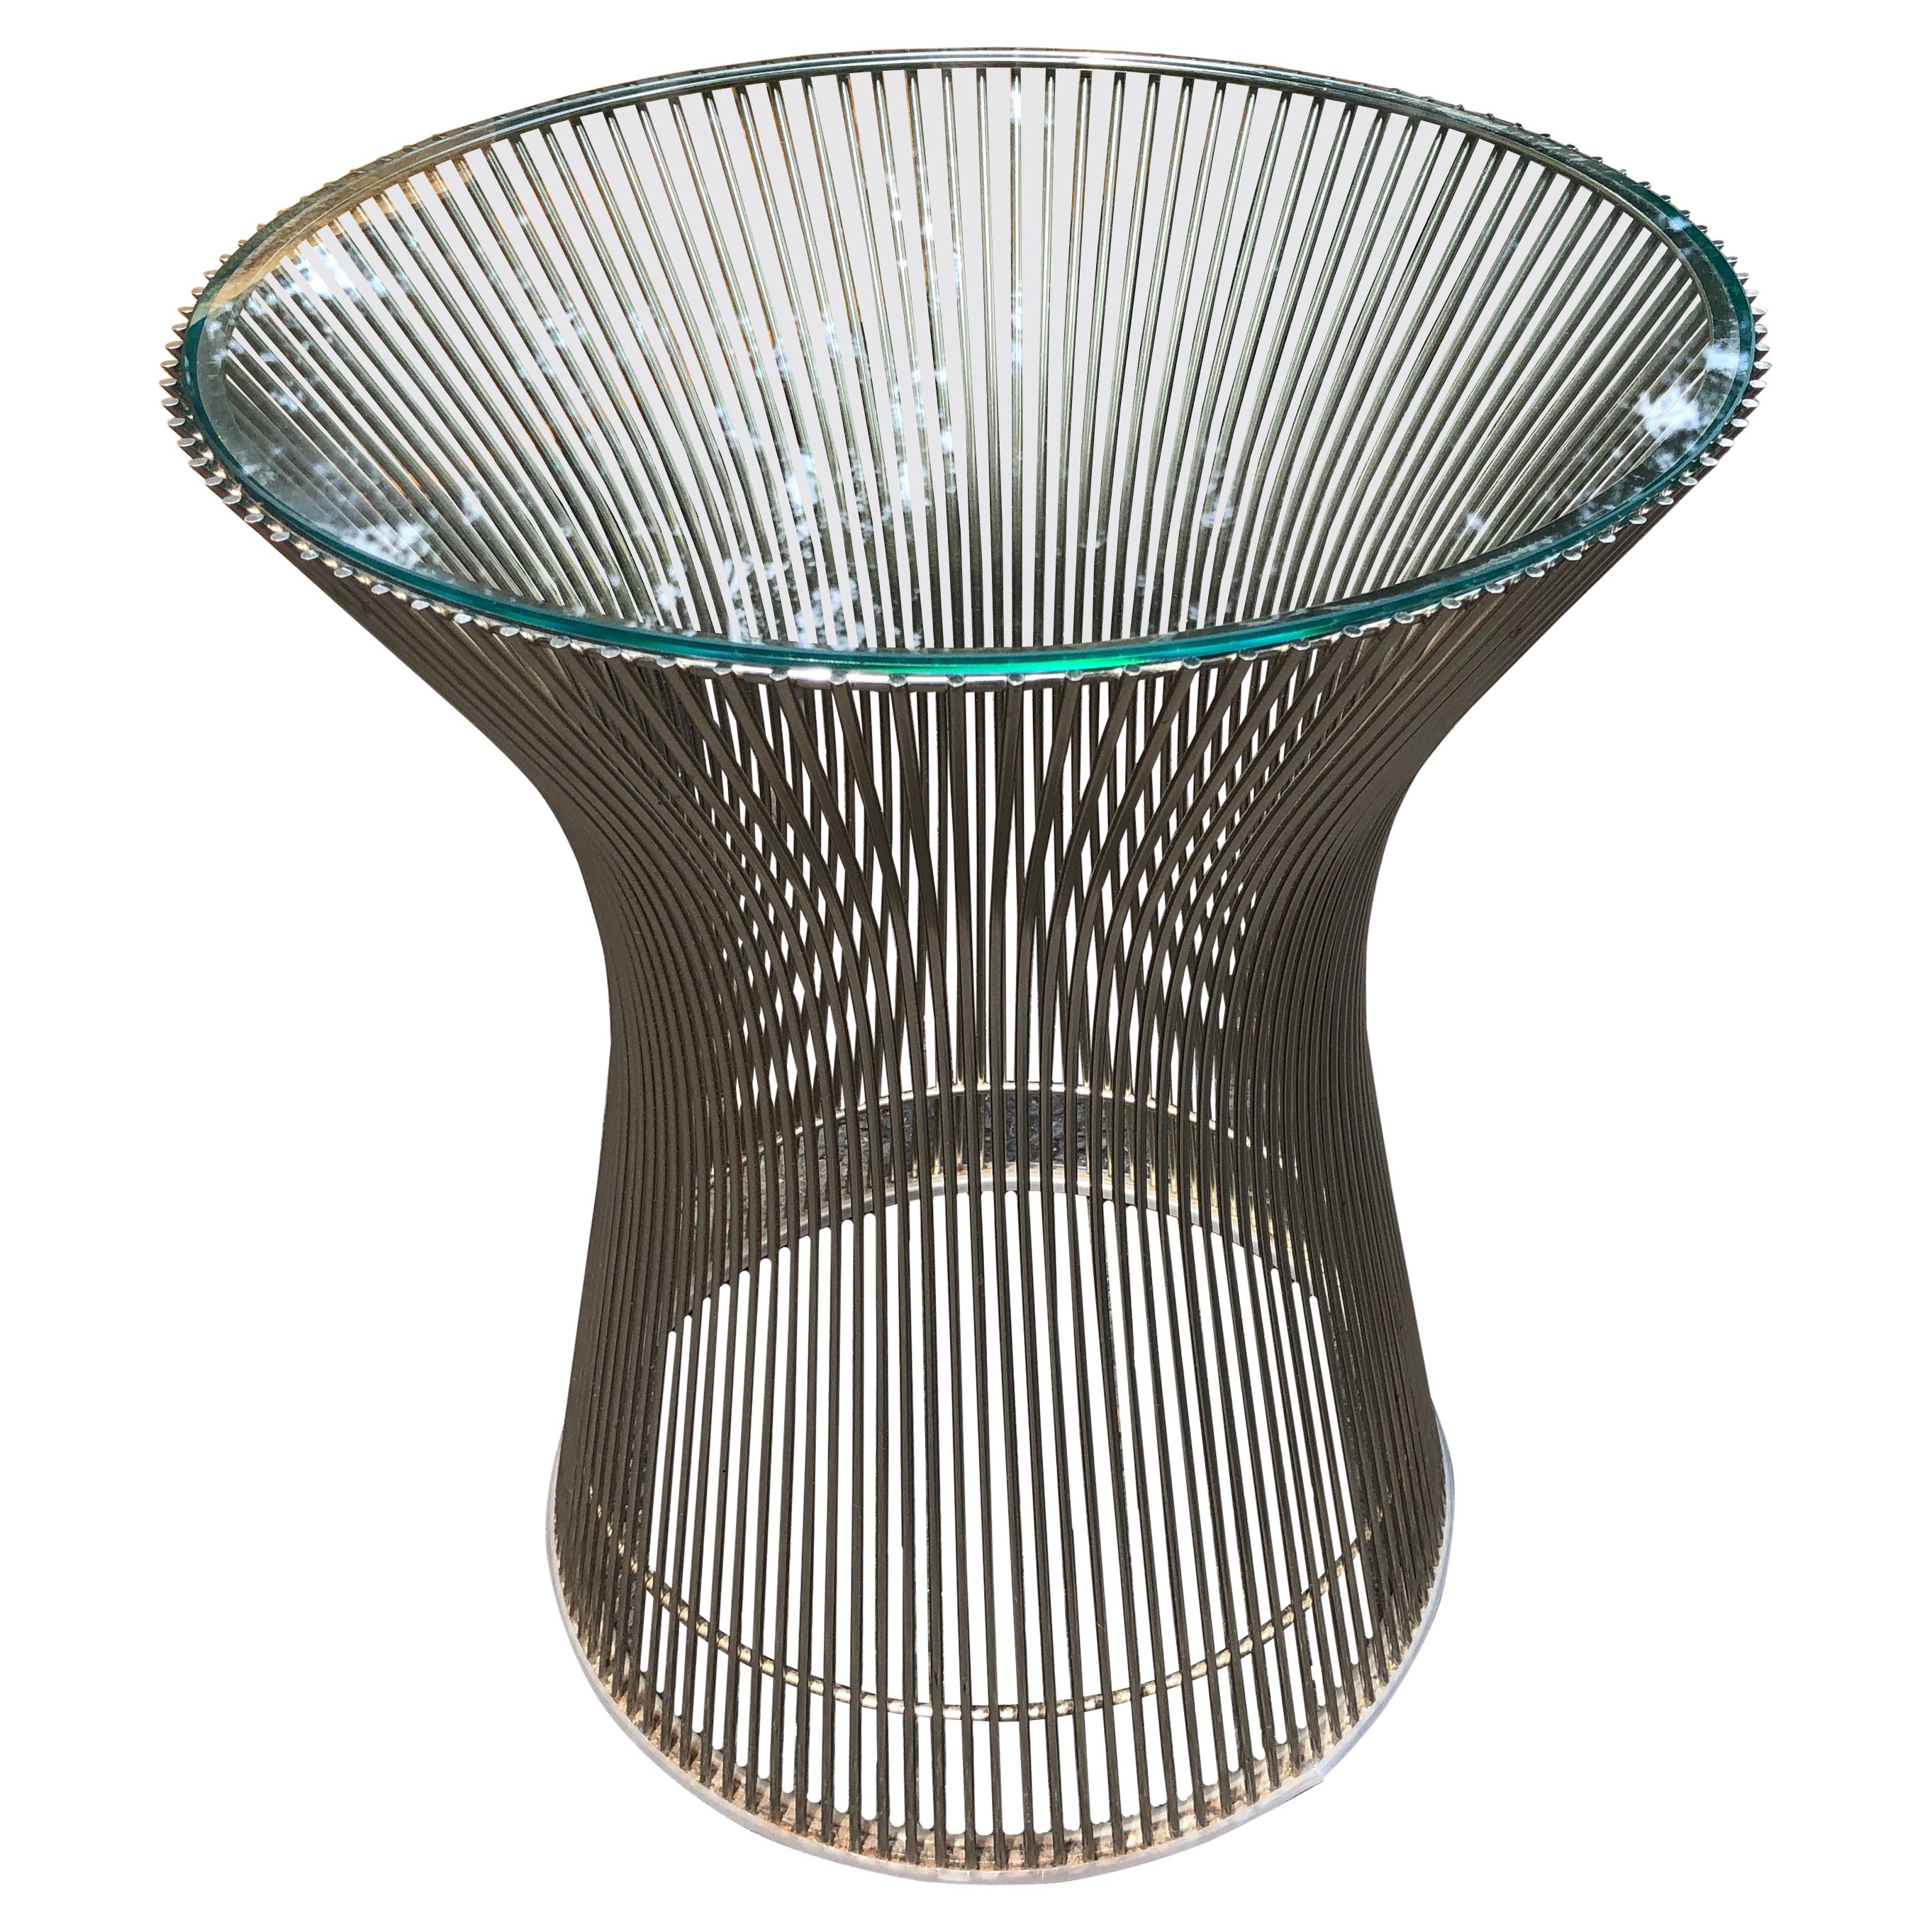 Fabulous Warren Platner for Knoll Side-End Table, Circa 1960 Mid-Century For Sale